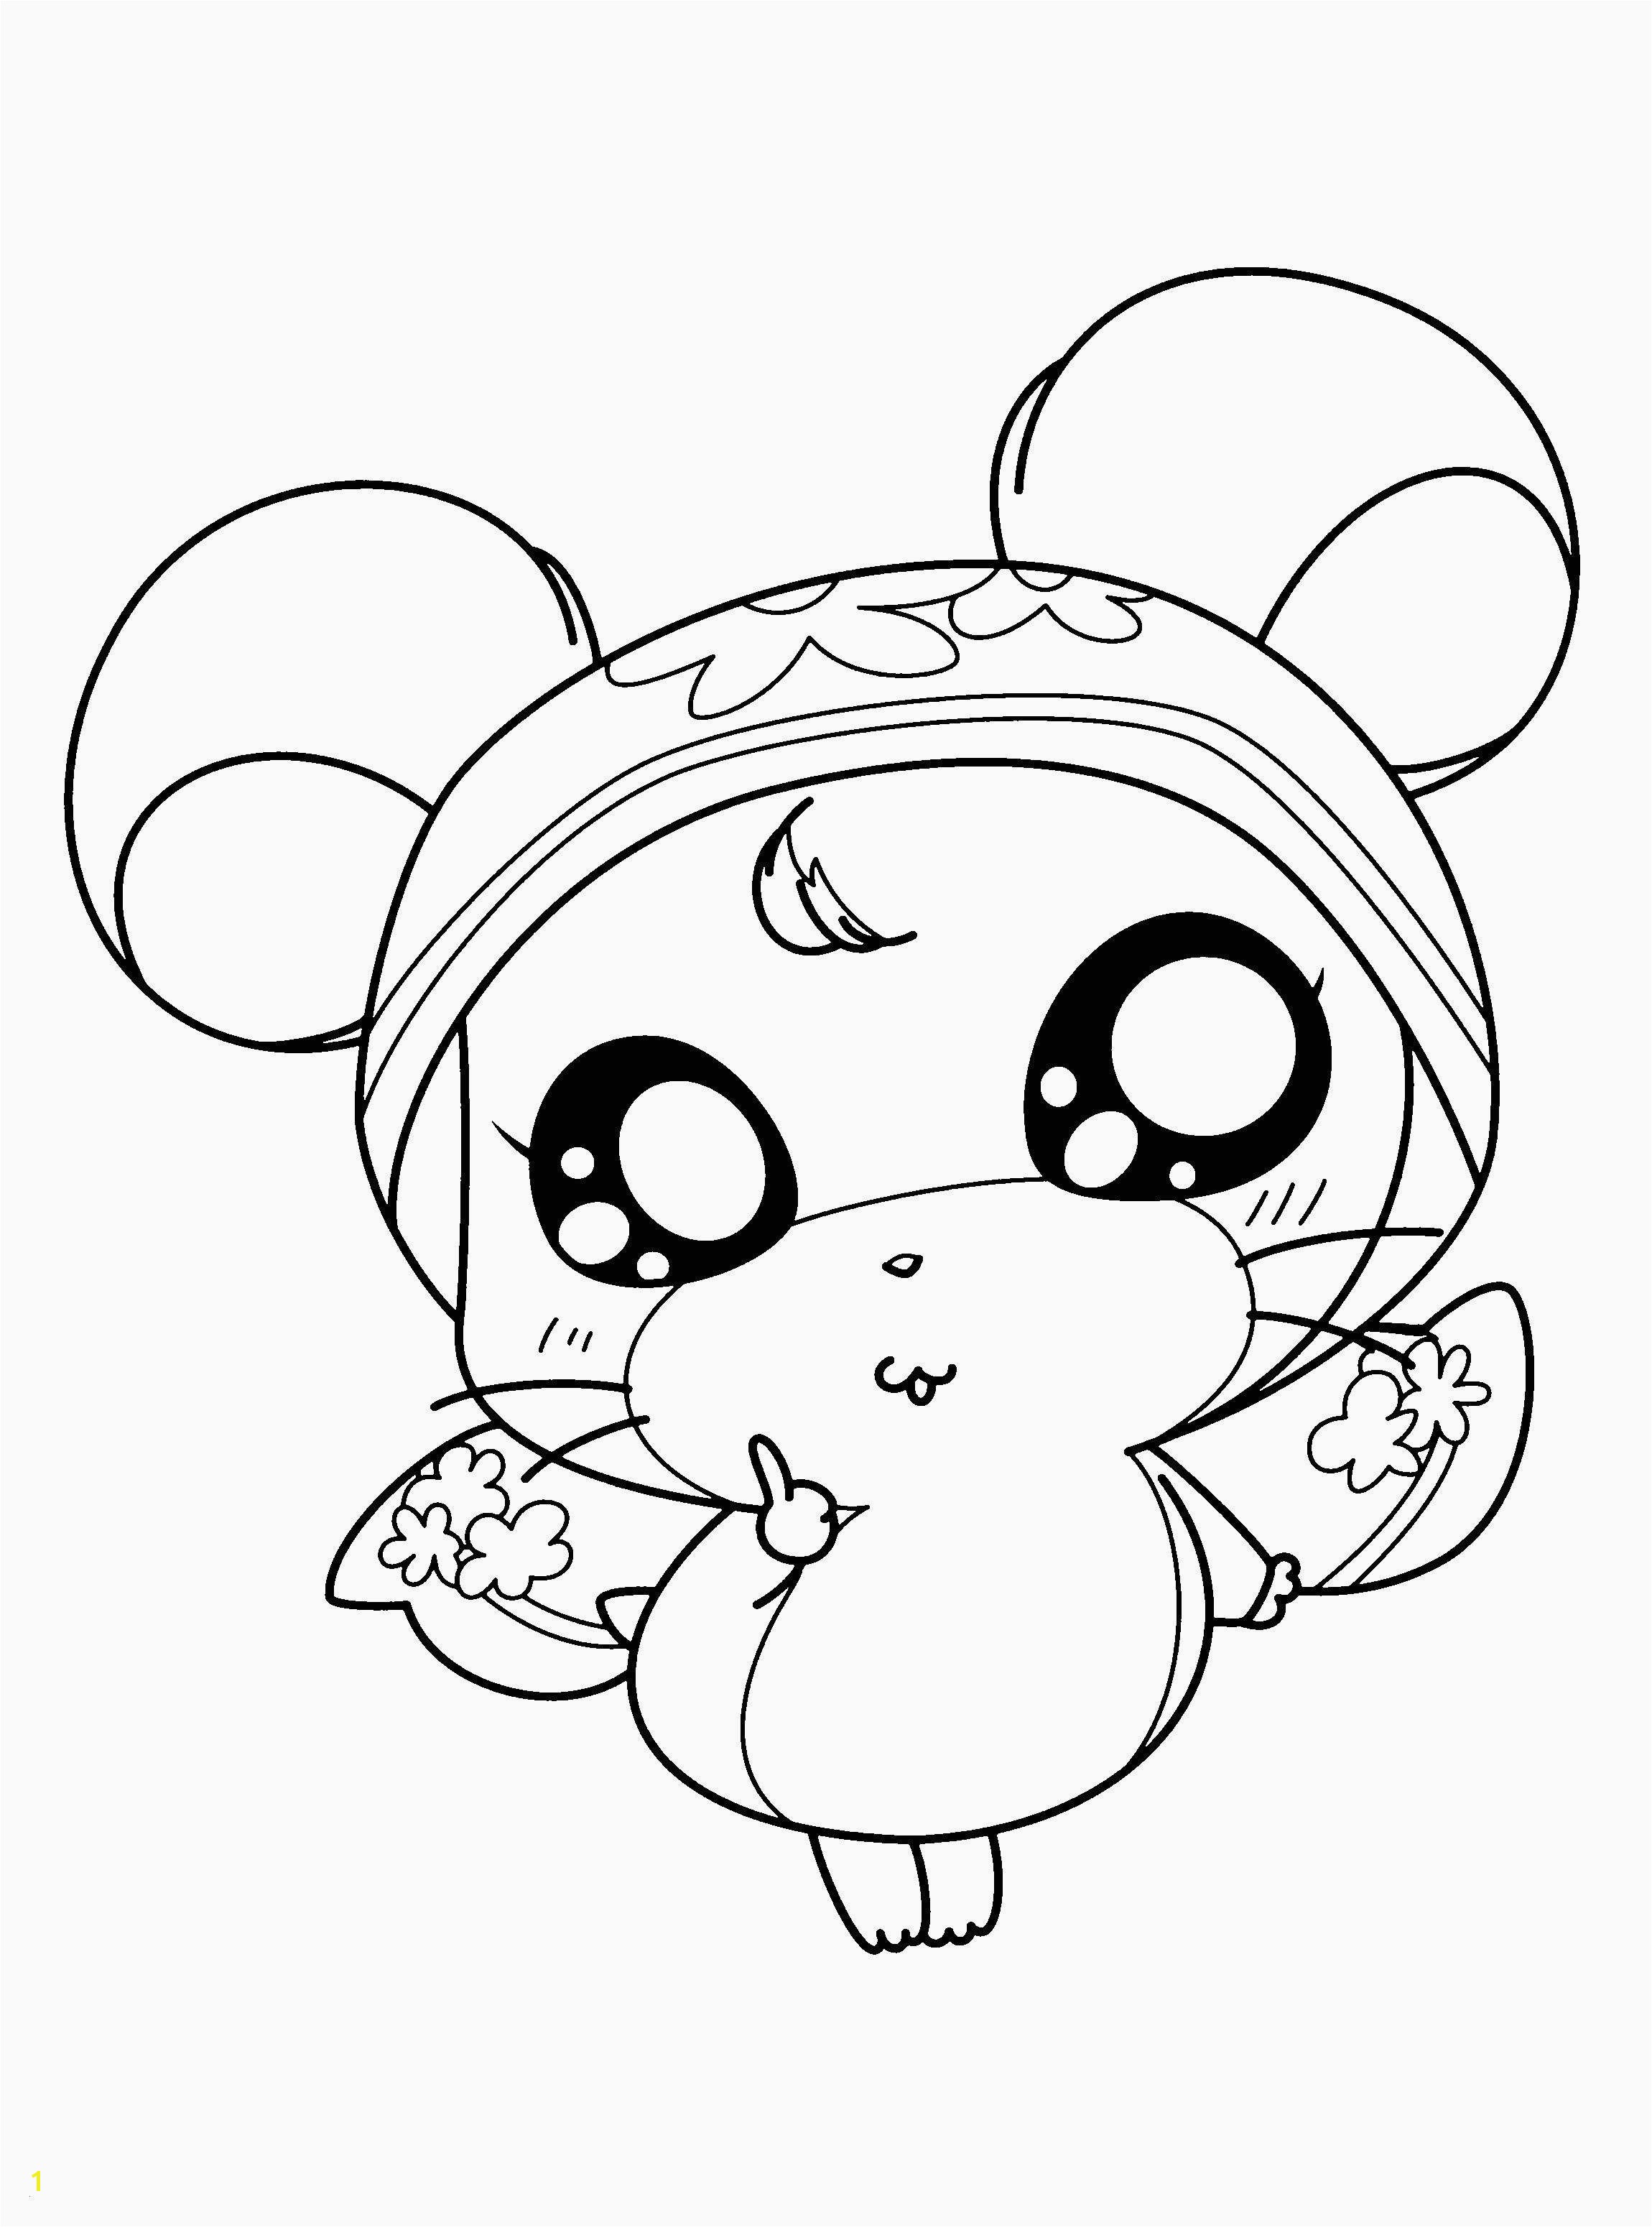 Baby Jasmine Coloring Pages Coloring Pages Happy Birthday Archives Katesgrove